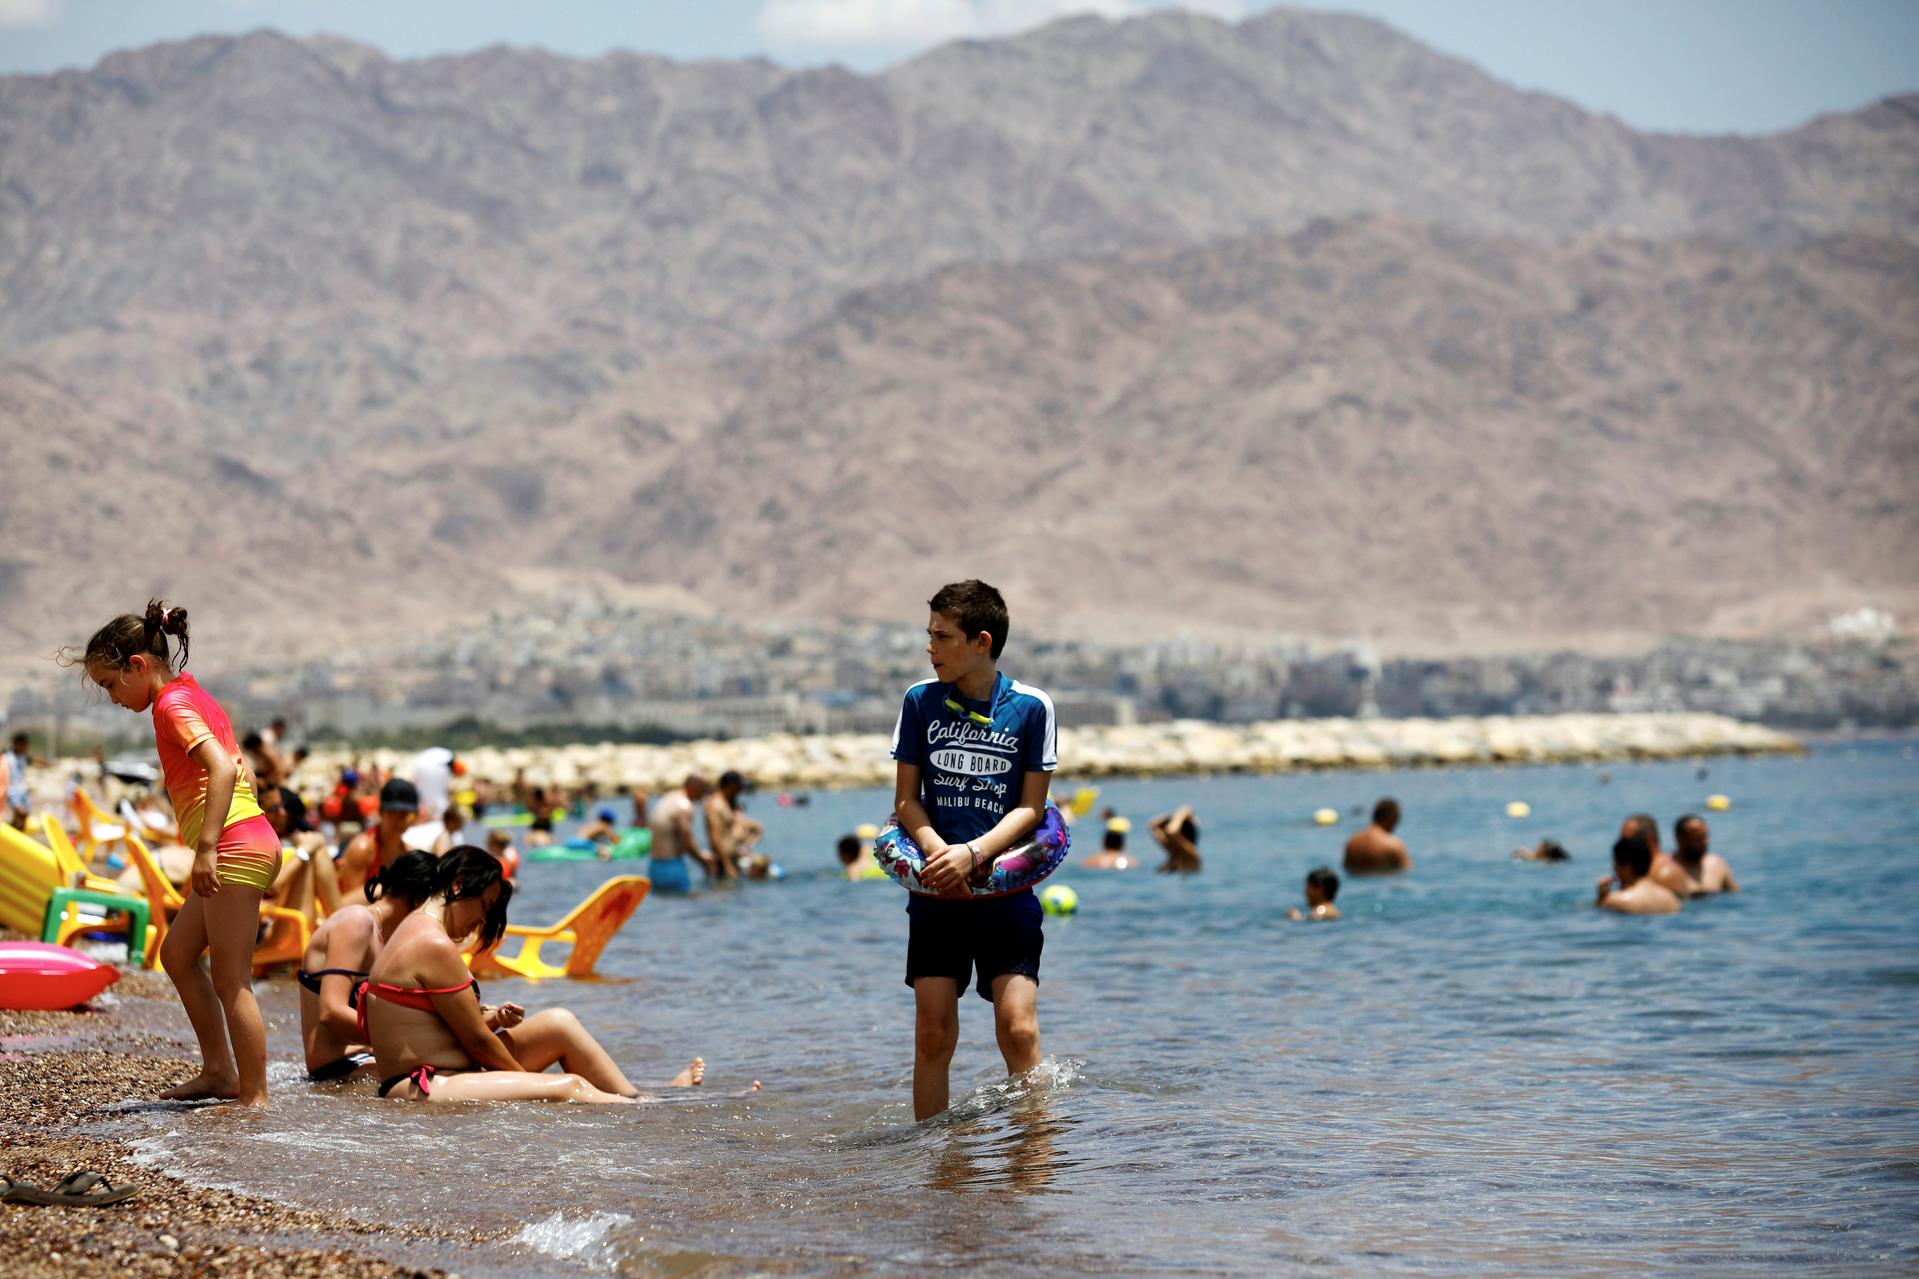 Israel worried over tourism growth after reaching record 4.55 million in 2019